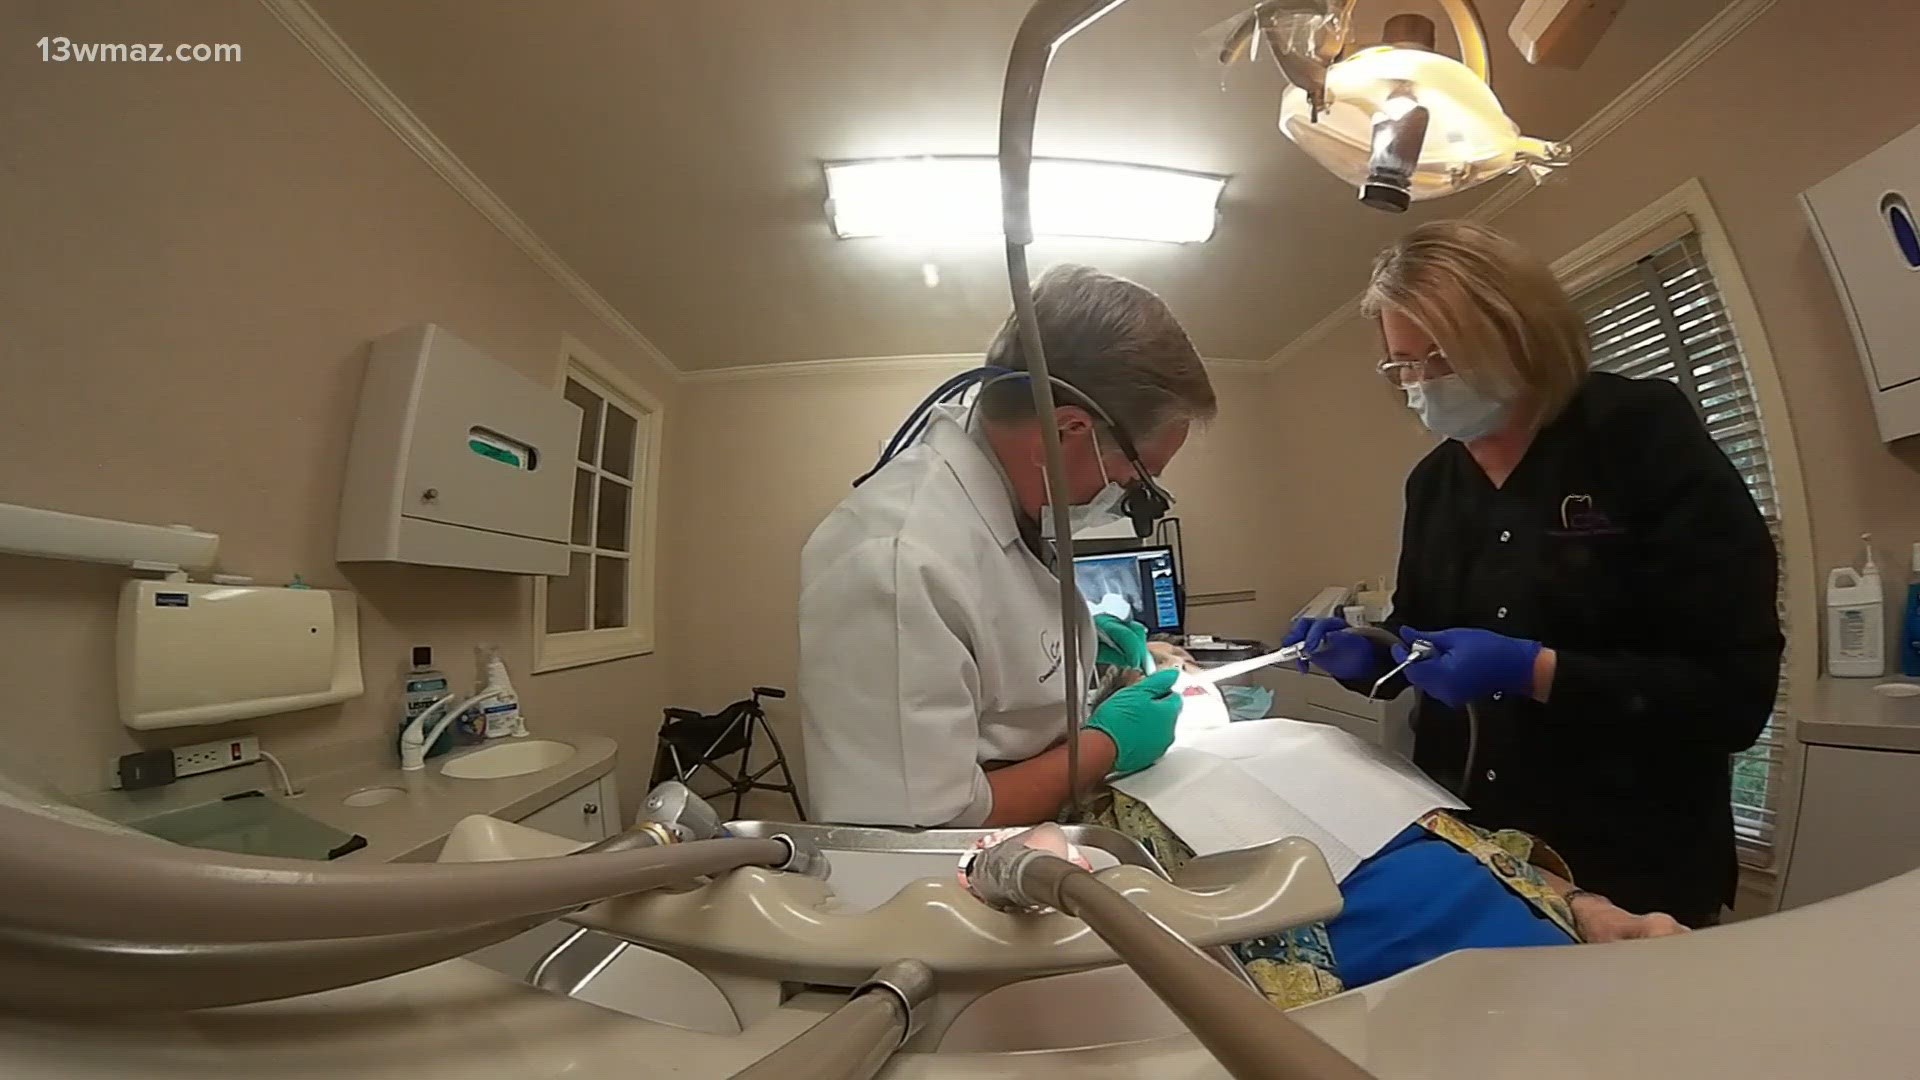 Dr. Jimmy Cassidy says when he retires, he hopes he's remembered with as much love and respect as the man who showed him what dentistry is all about.